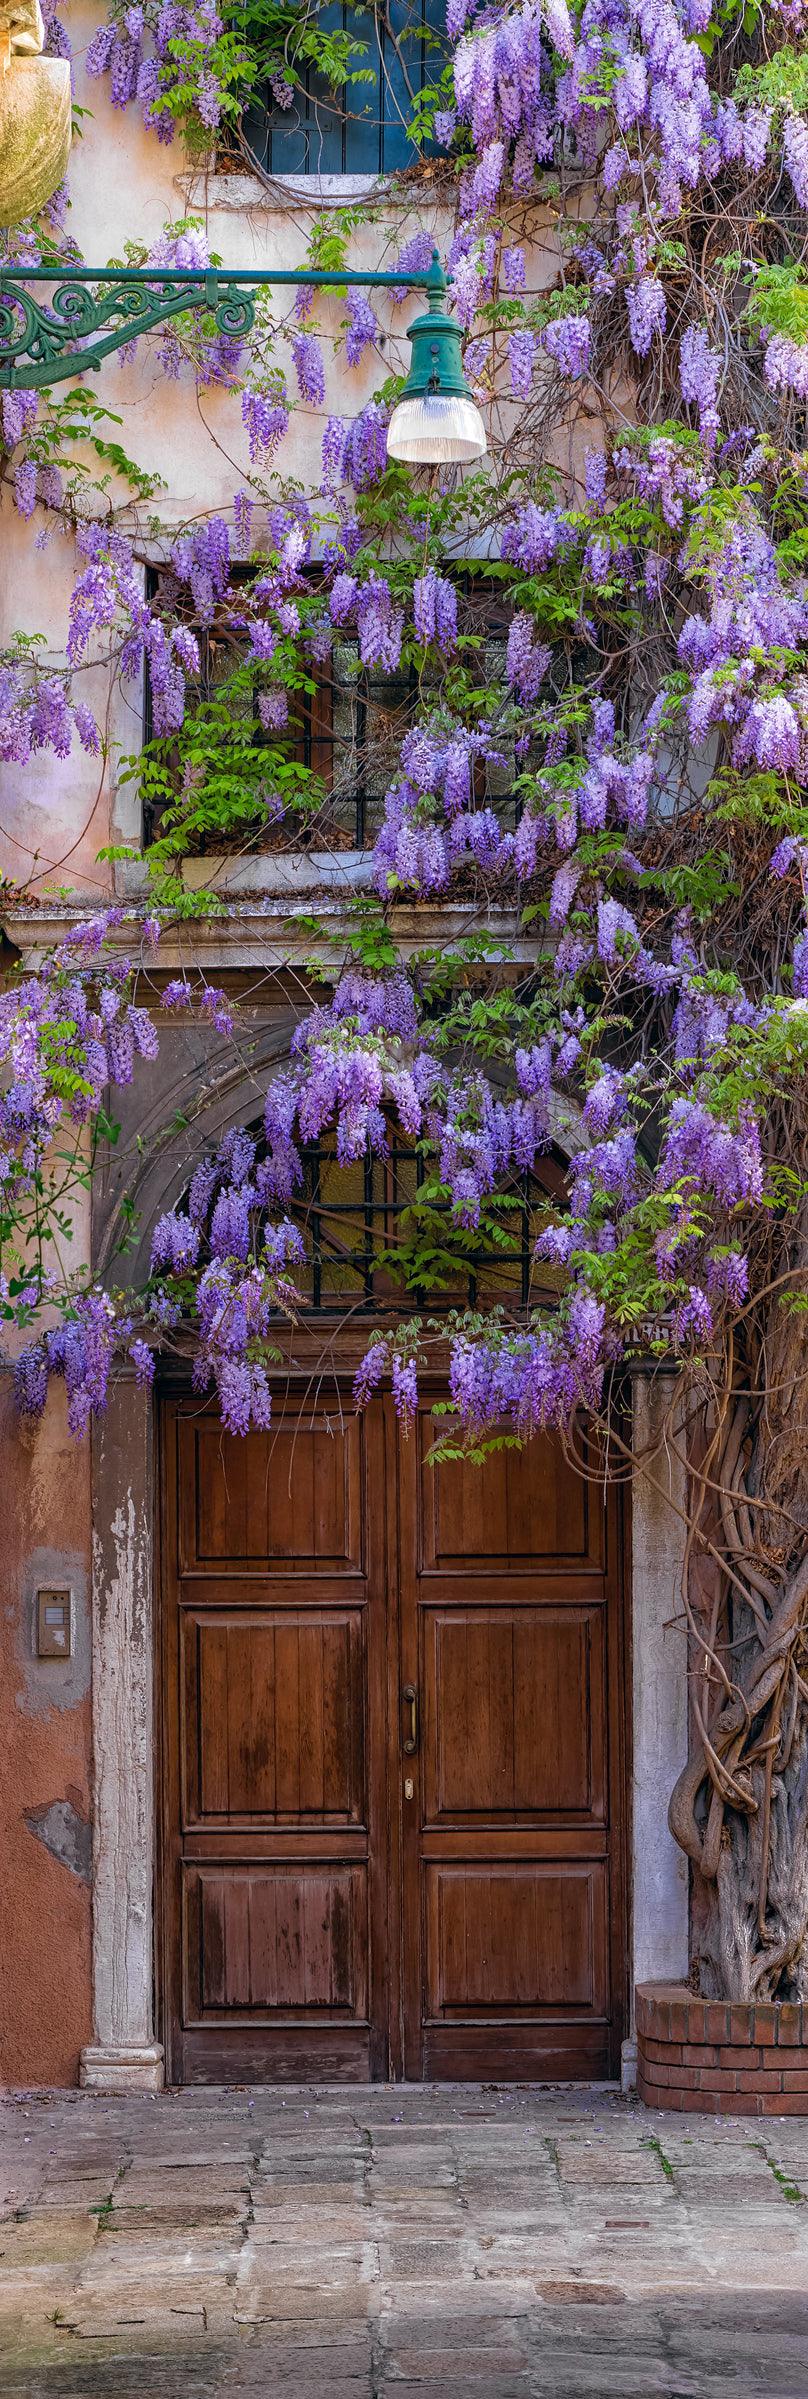 Purple flowers of the creeping Wisteria hanging over the doorway of an old building in Venice Italy